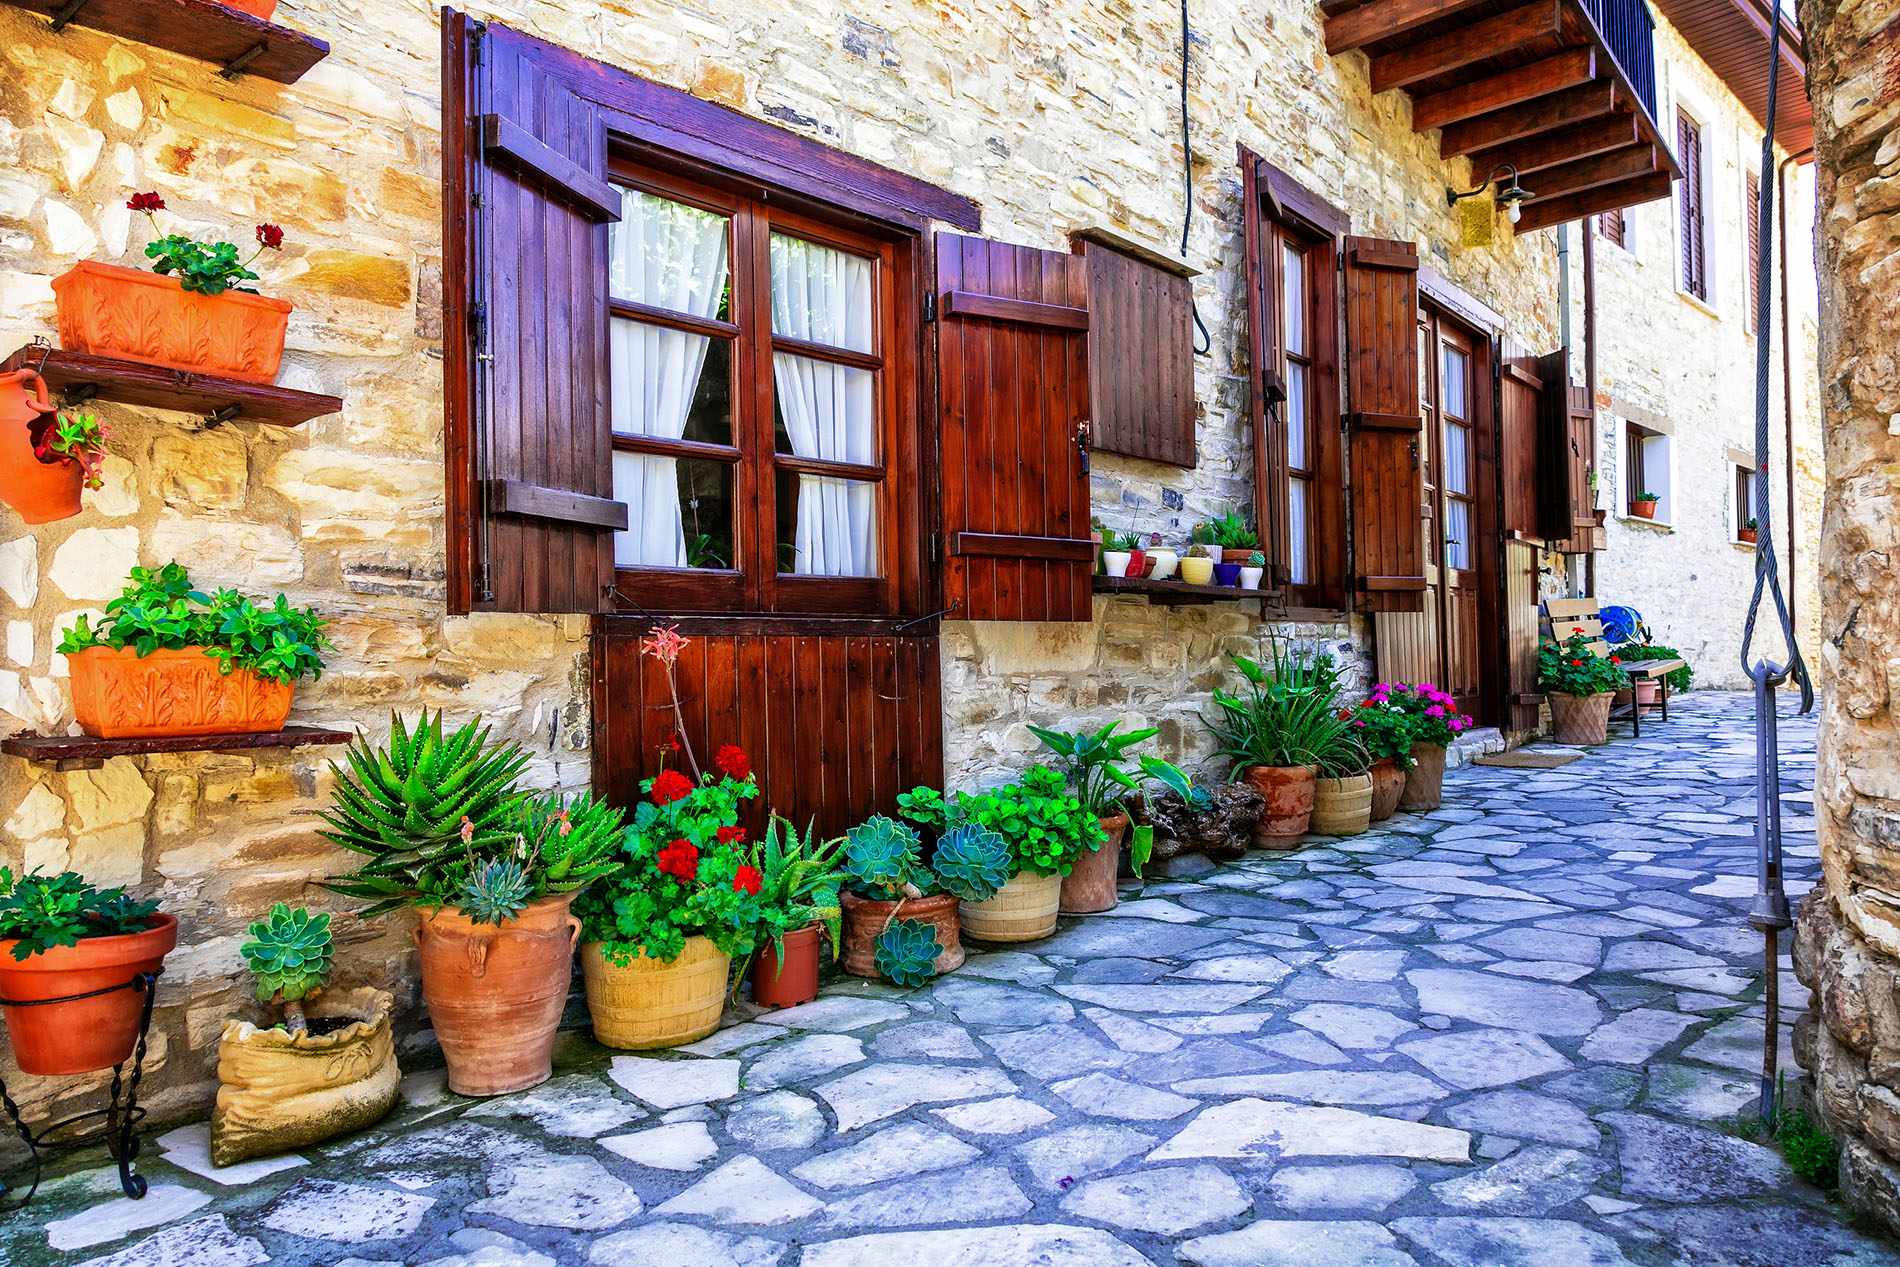 lefkara-village-floral-street-and-traditional-housesjpg0